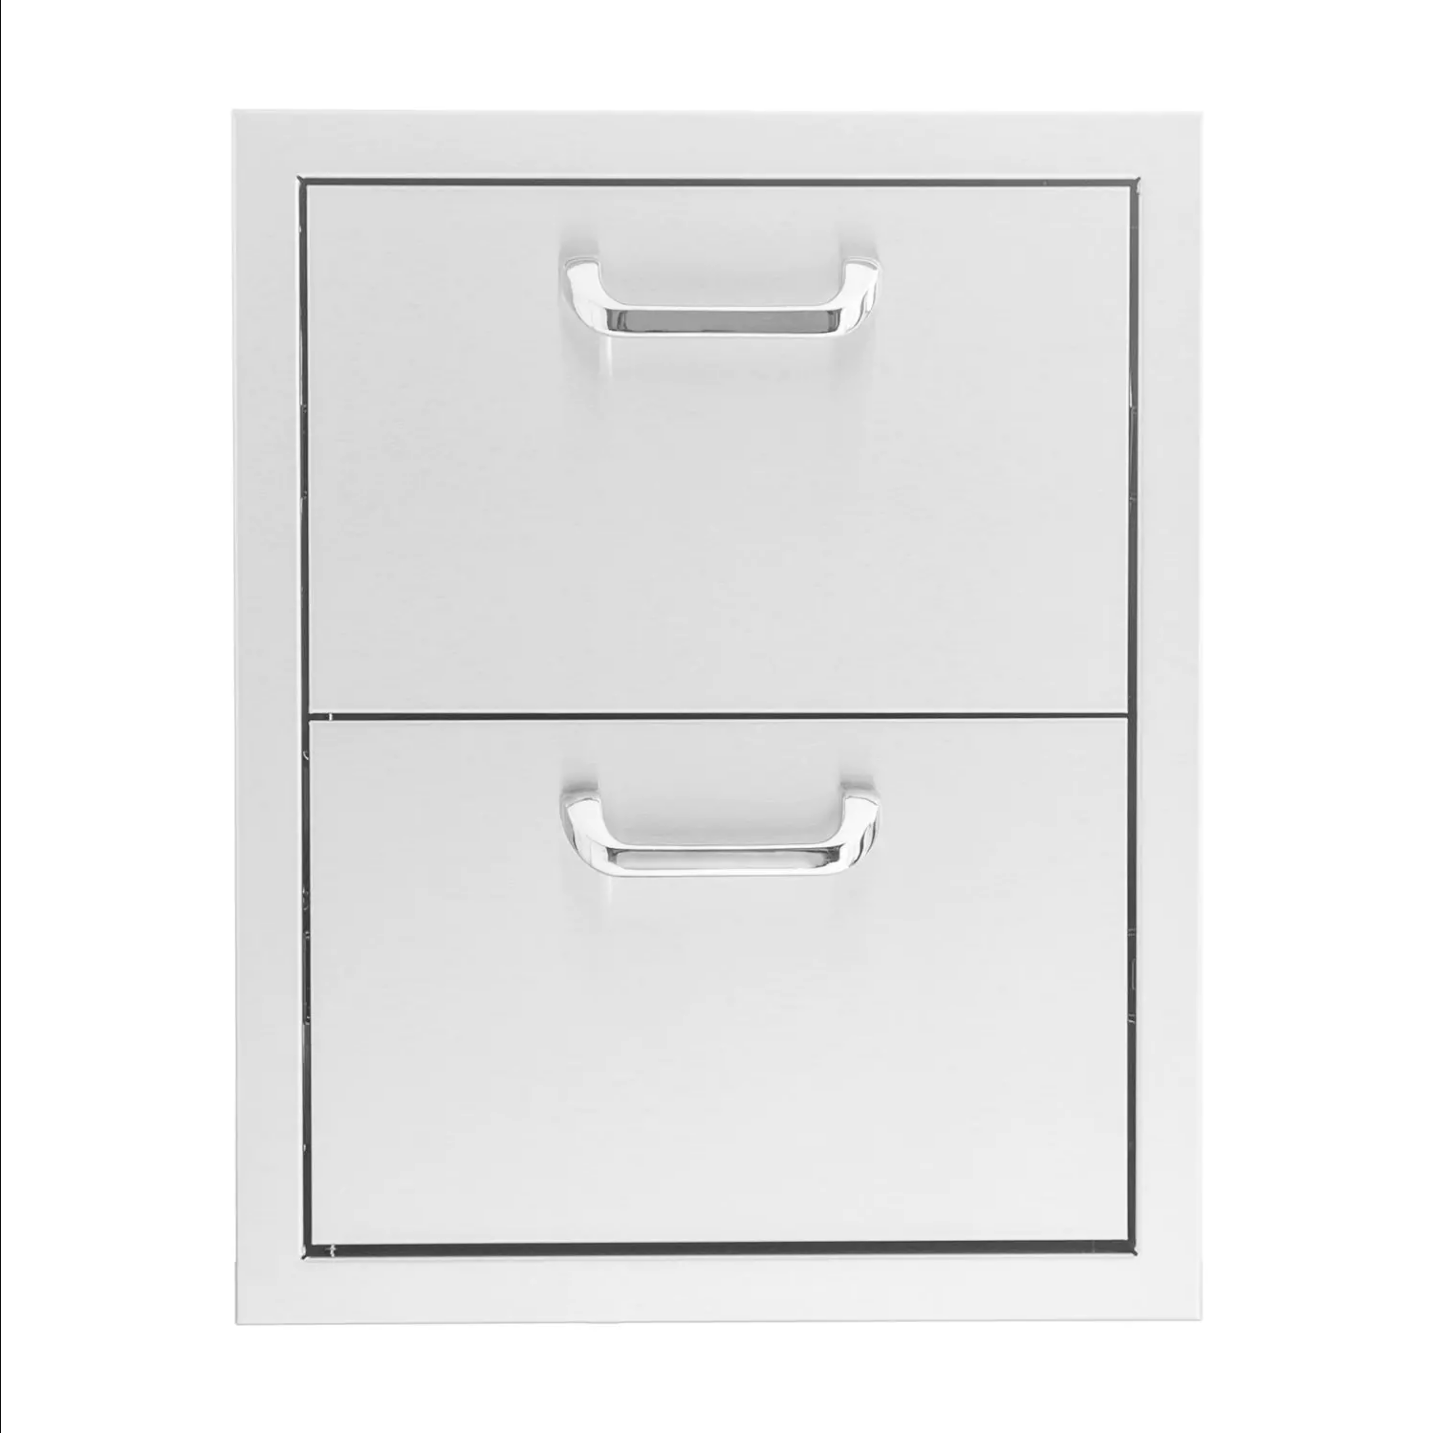 PCM 260 Series 16" Stainless Steel Double Access Drawer